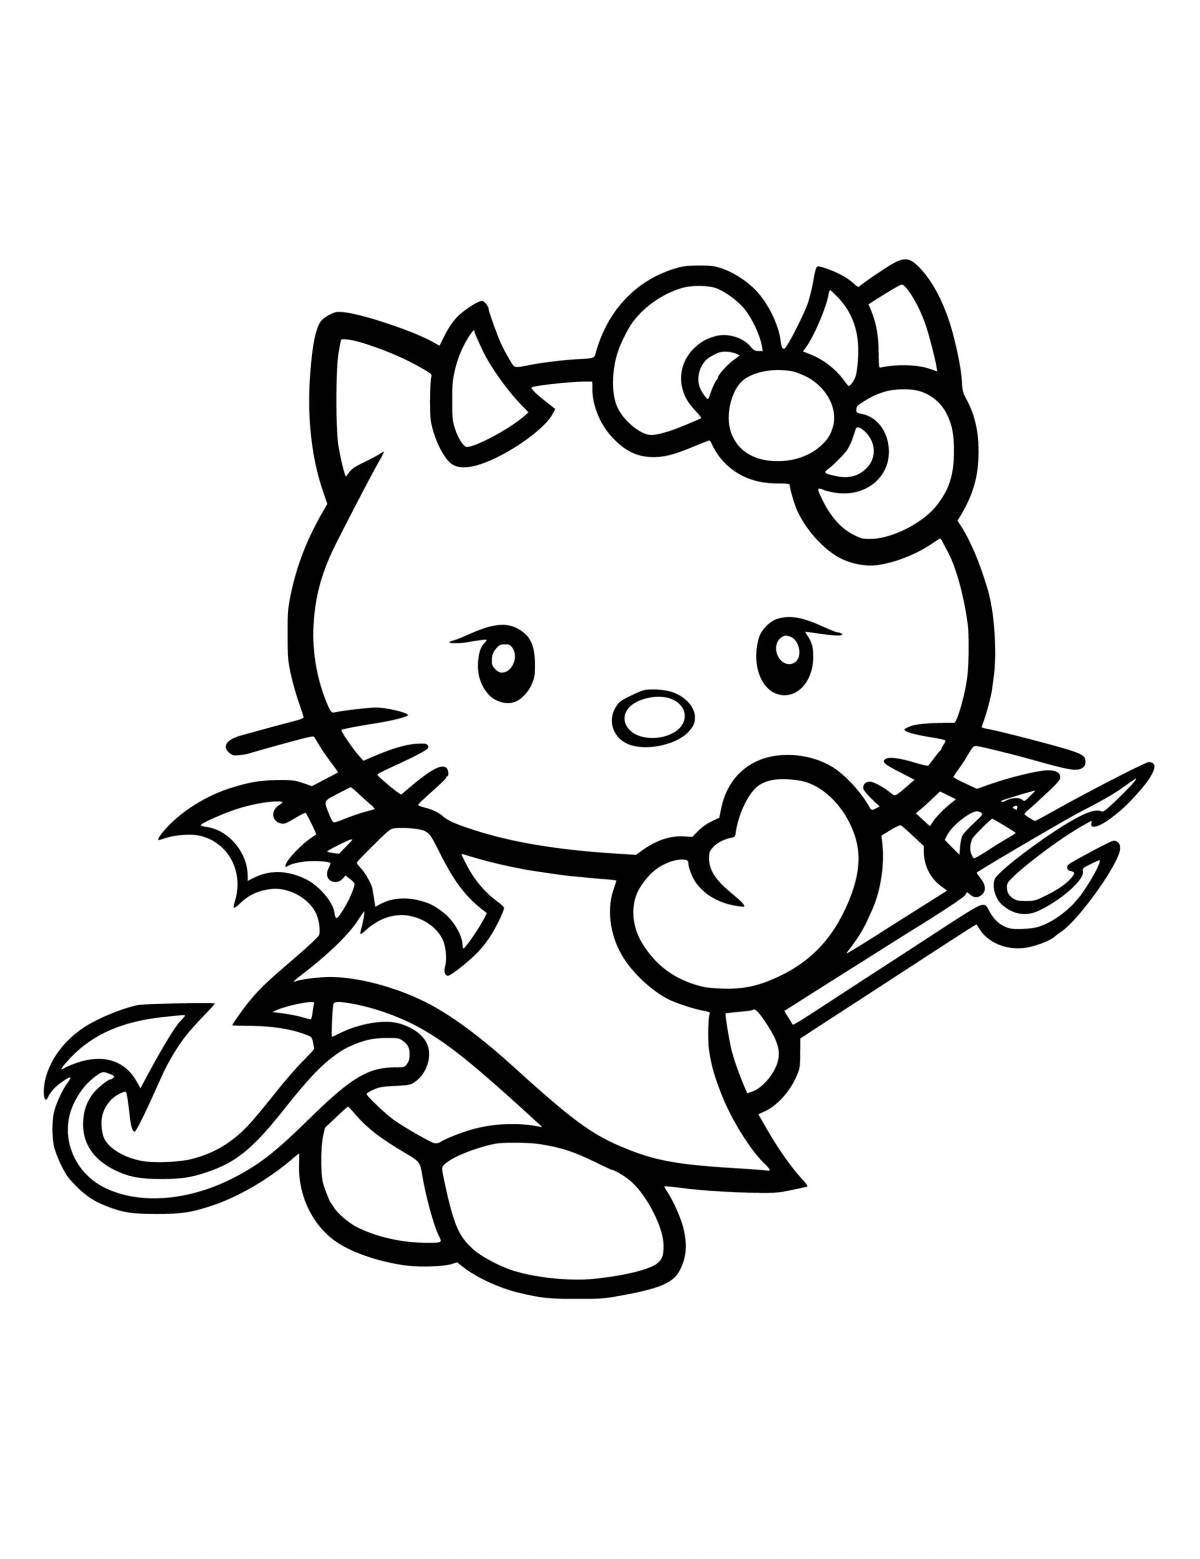 Adorable hello kitty demon coloring page